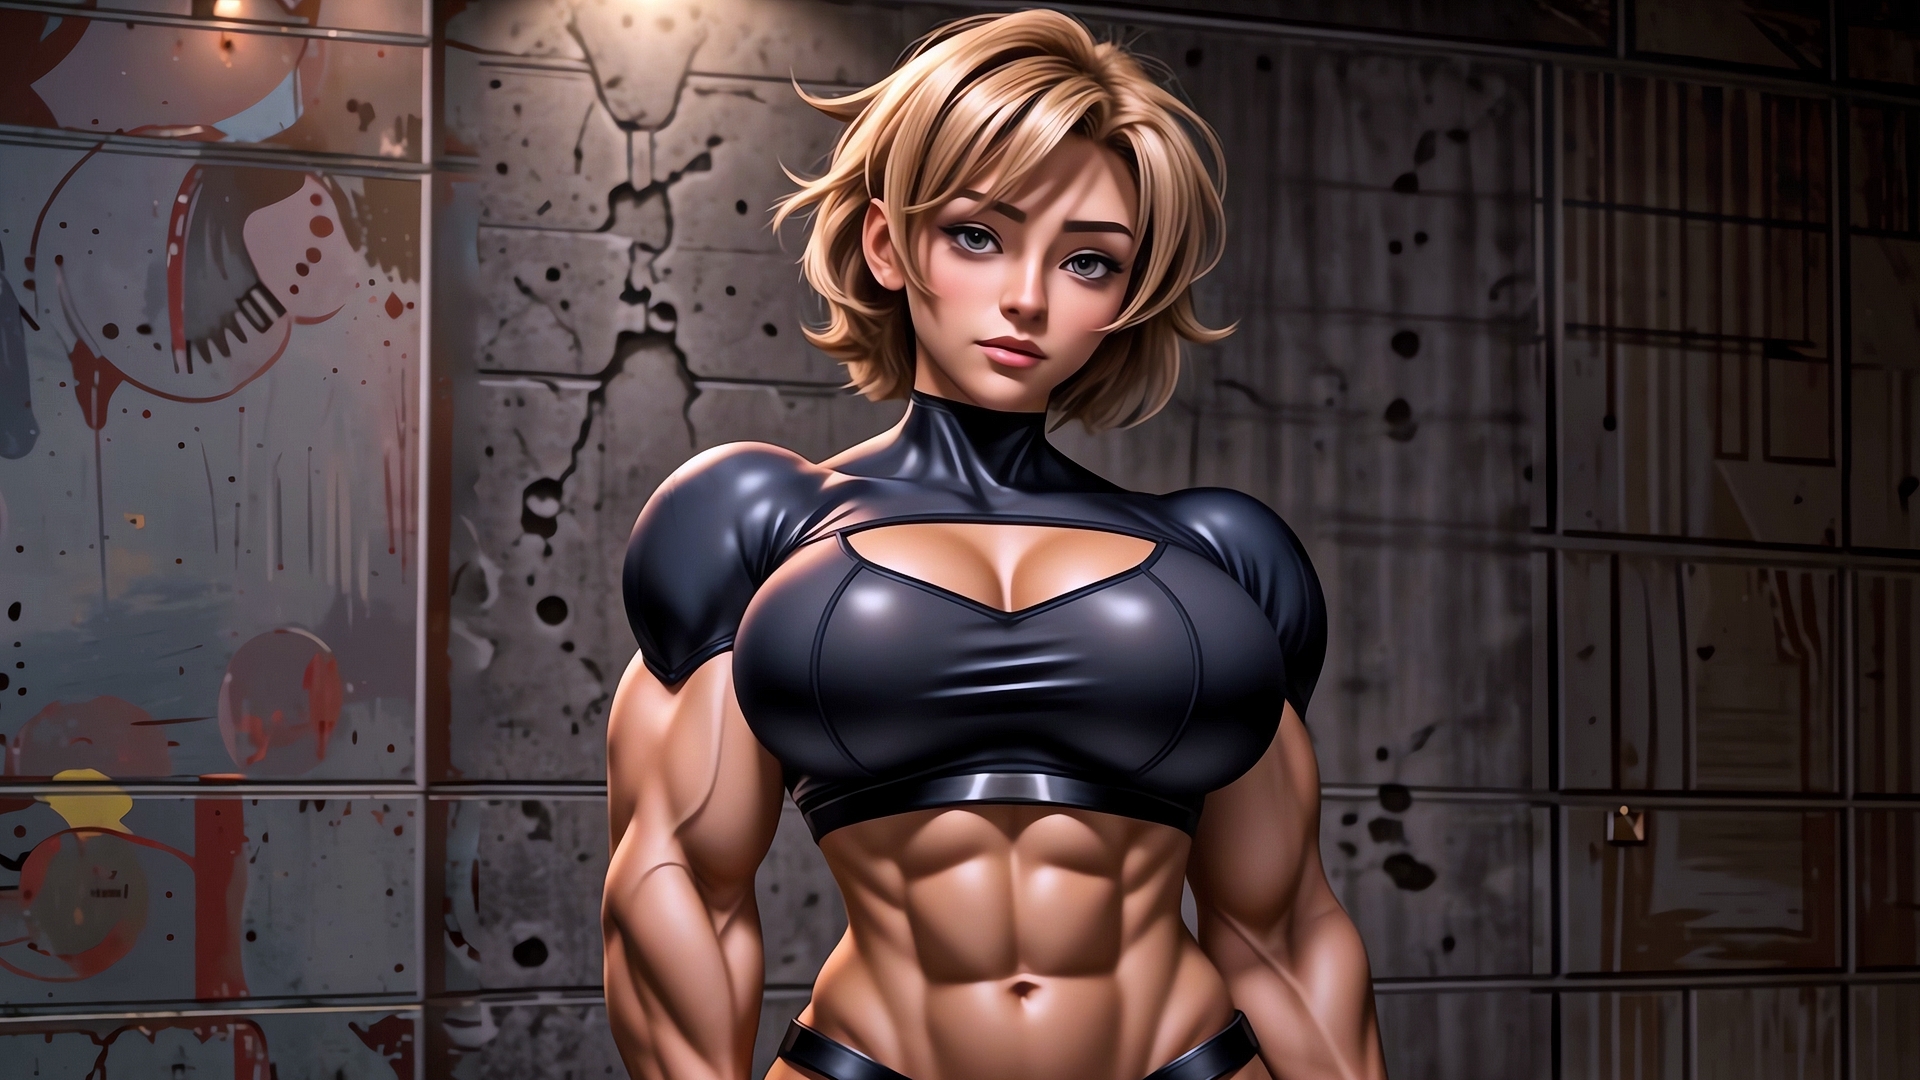 Blonde-haired girl bodybuilder standing against the wall